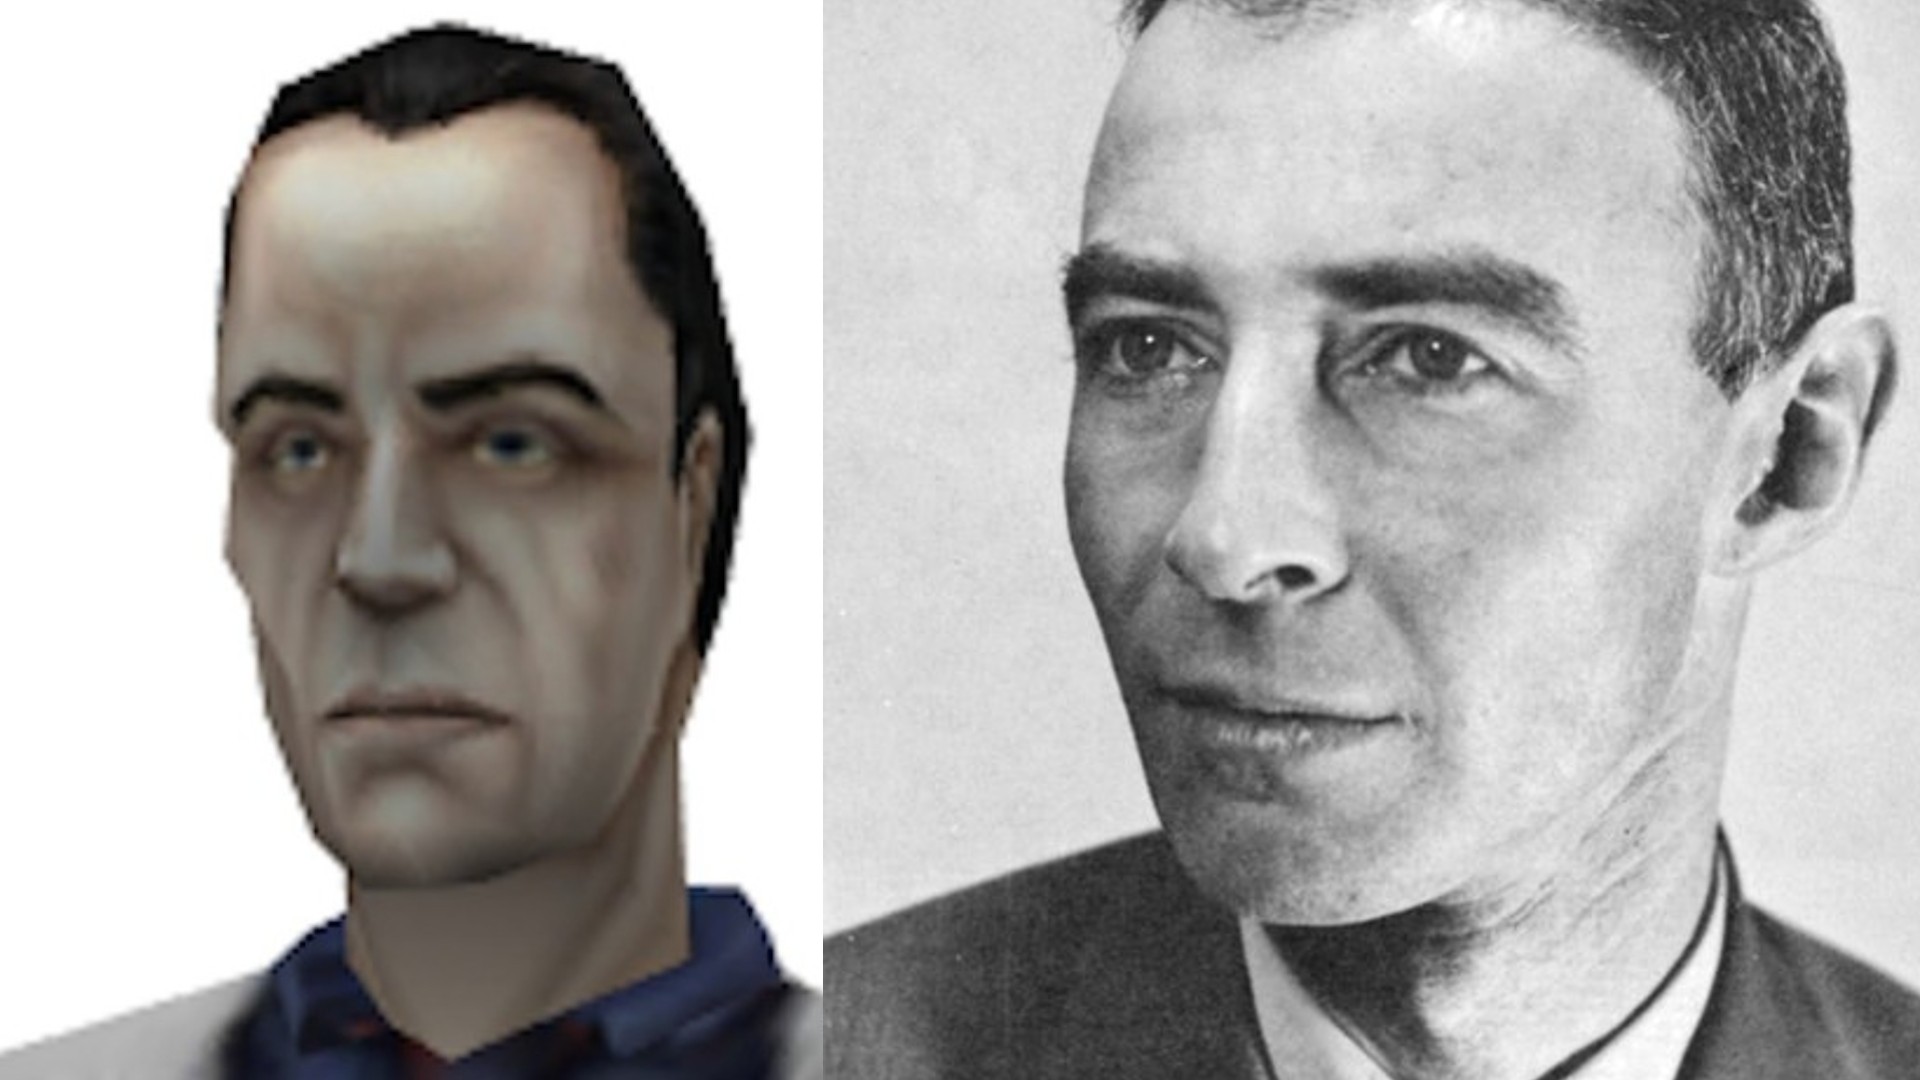 Half-Life characters: A scientist from Valve FPS game Half-Life next to Robert Oppenheimer